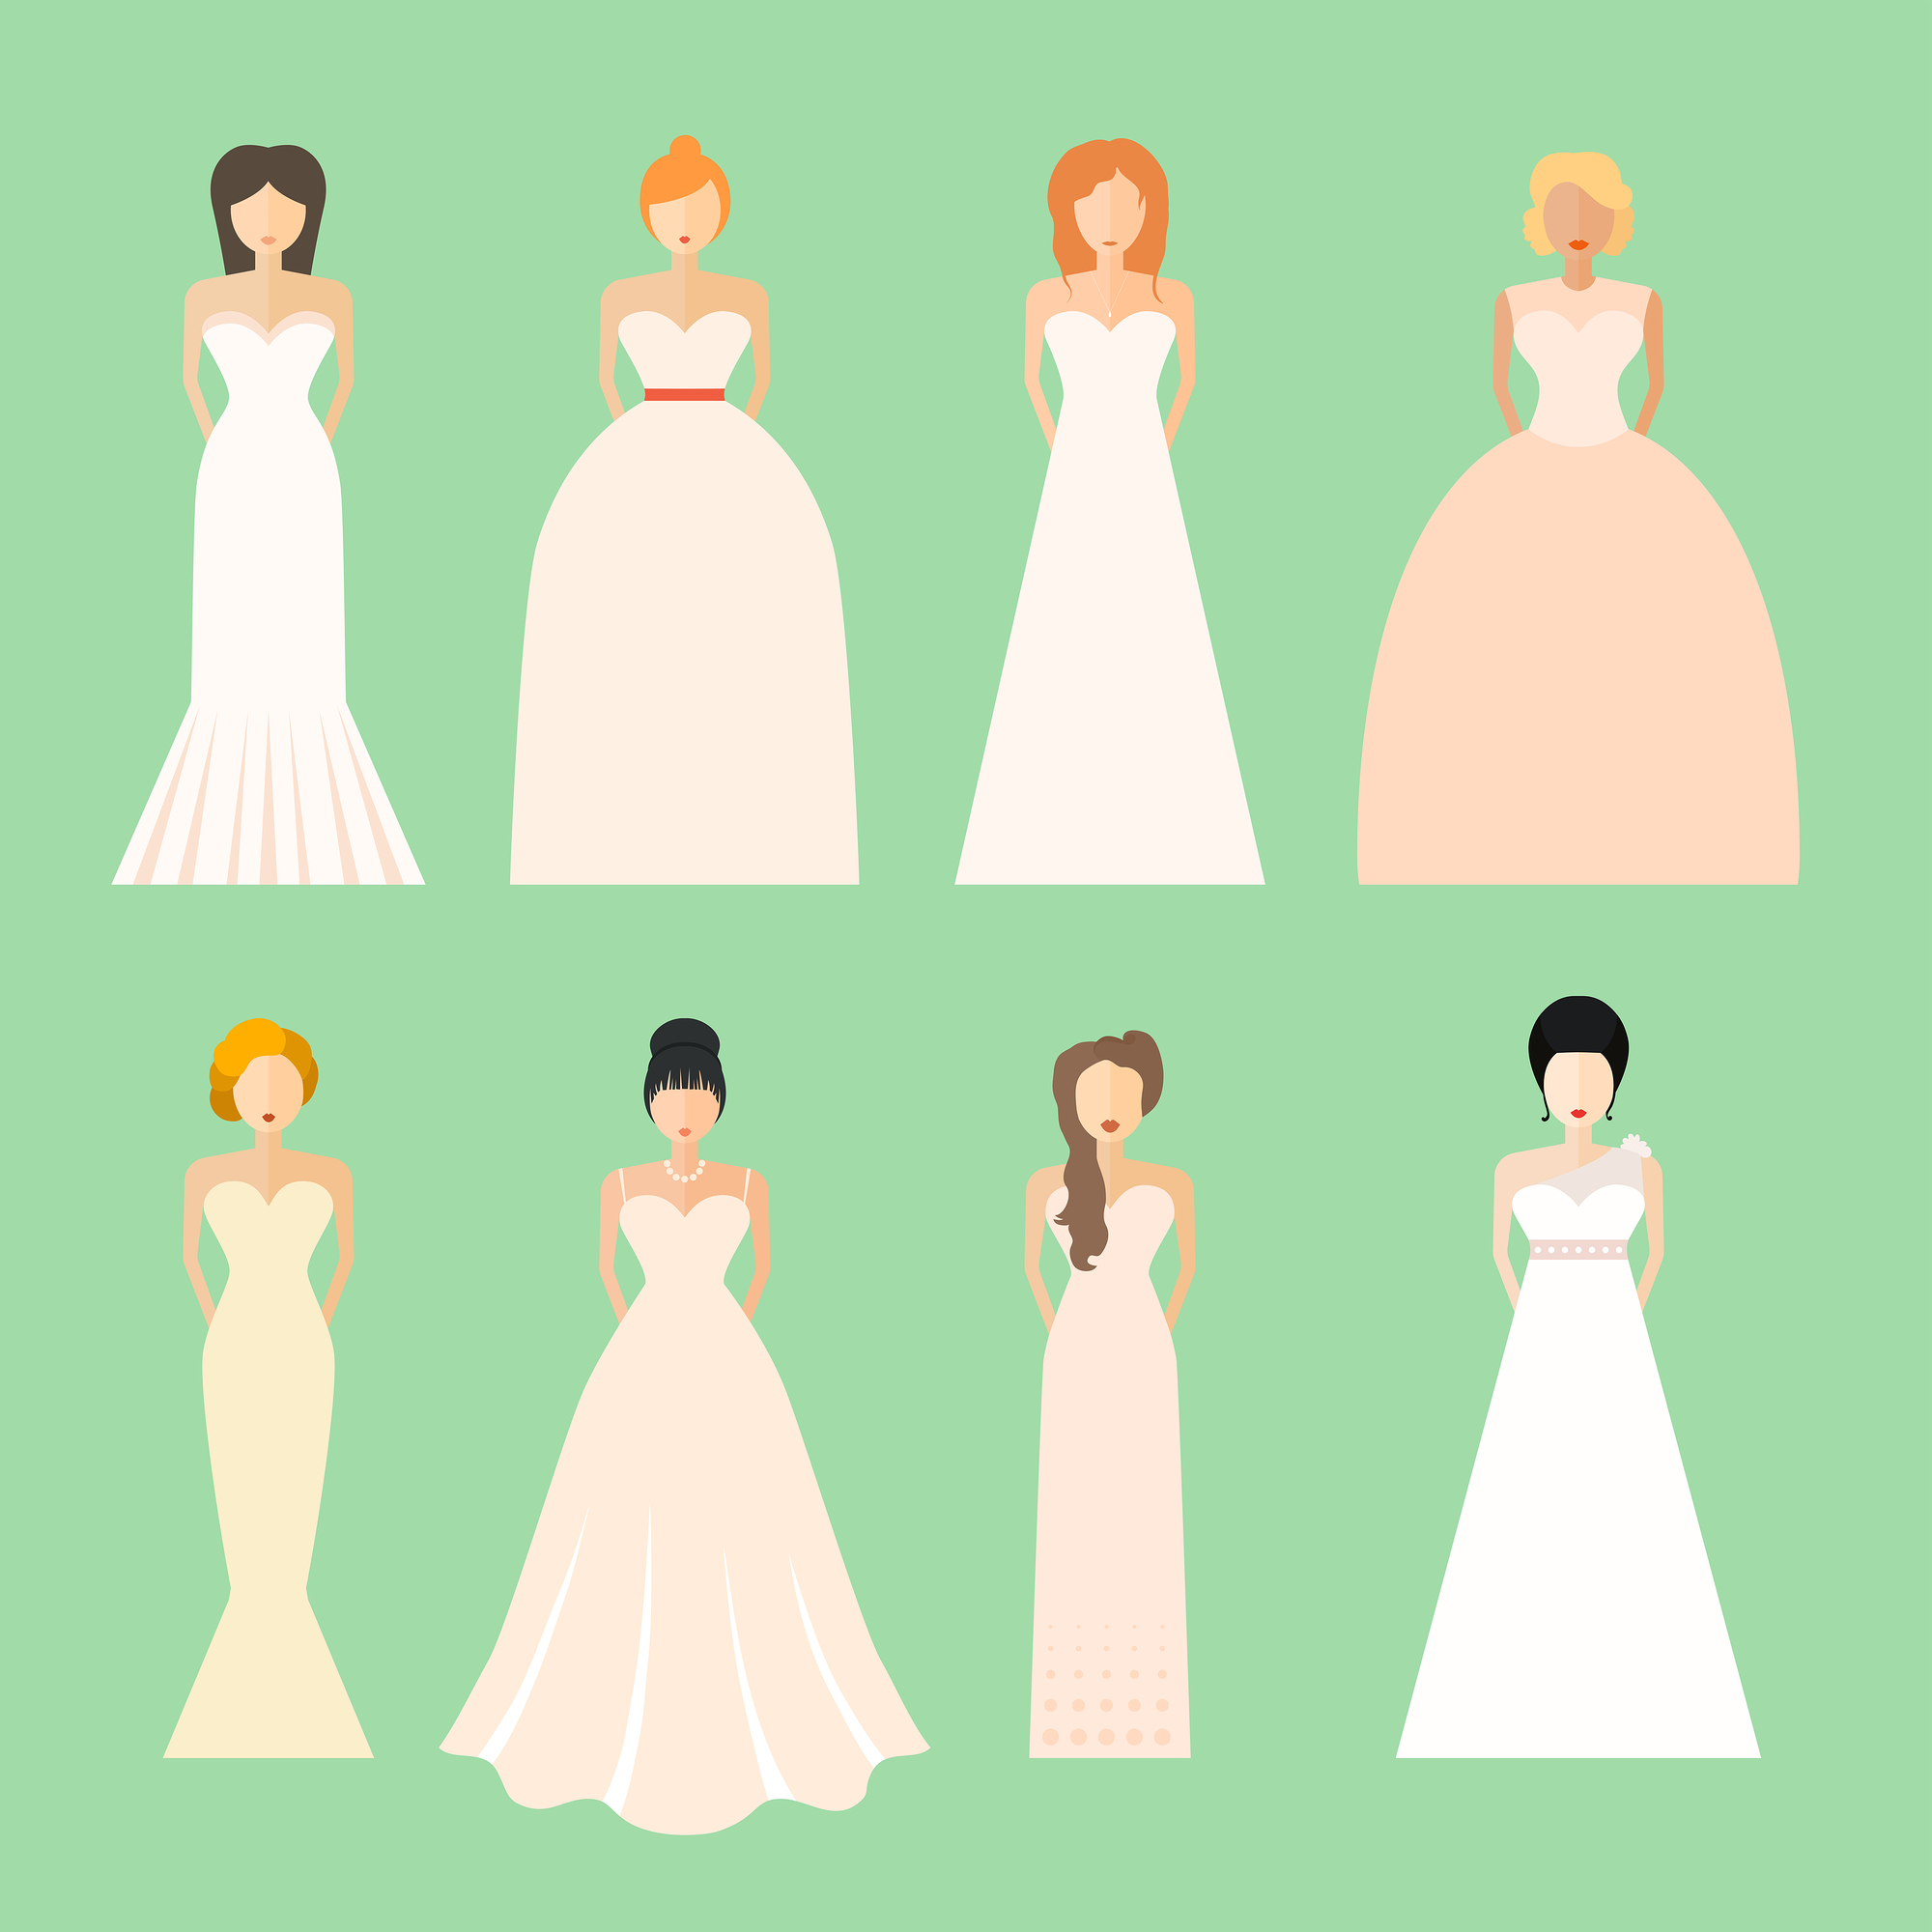 How to Choose the Best Wedding Dress For Your Body Type